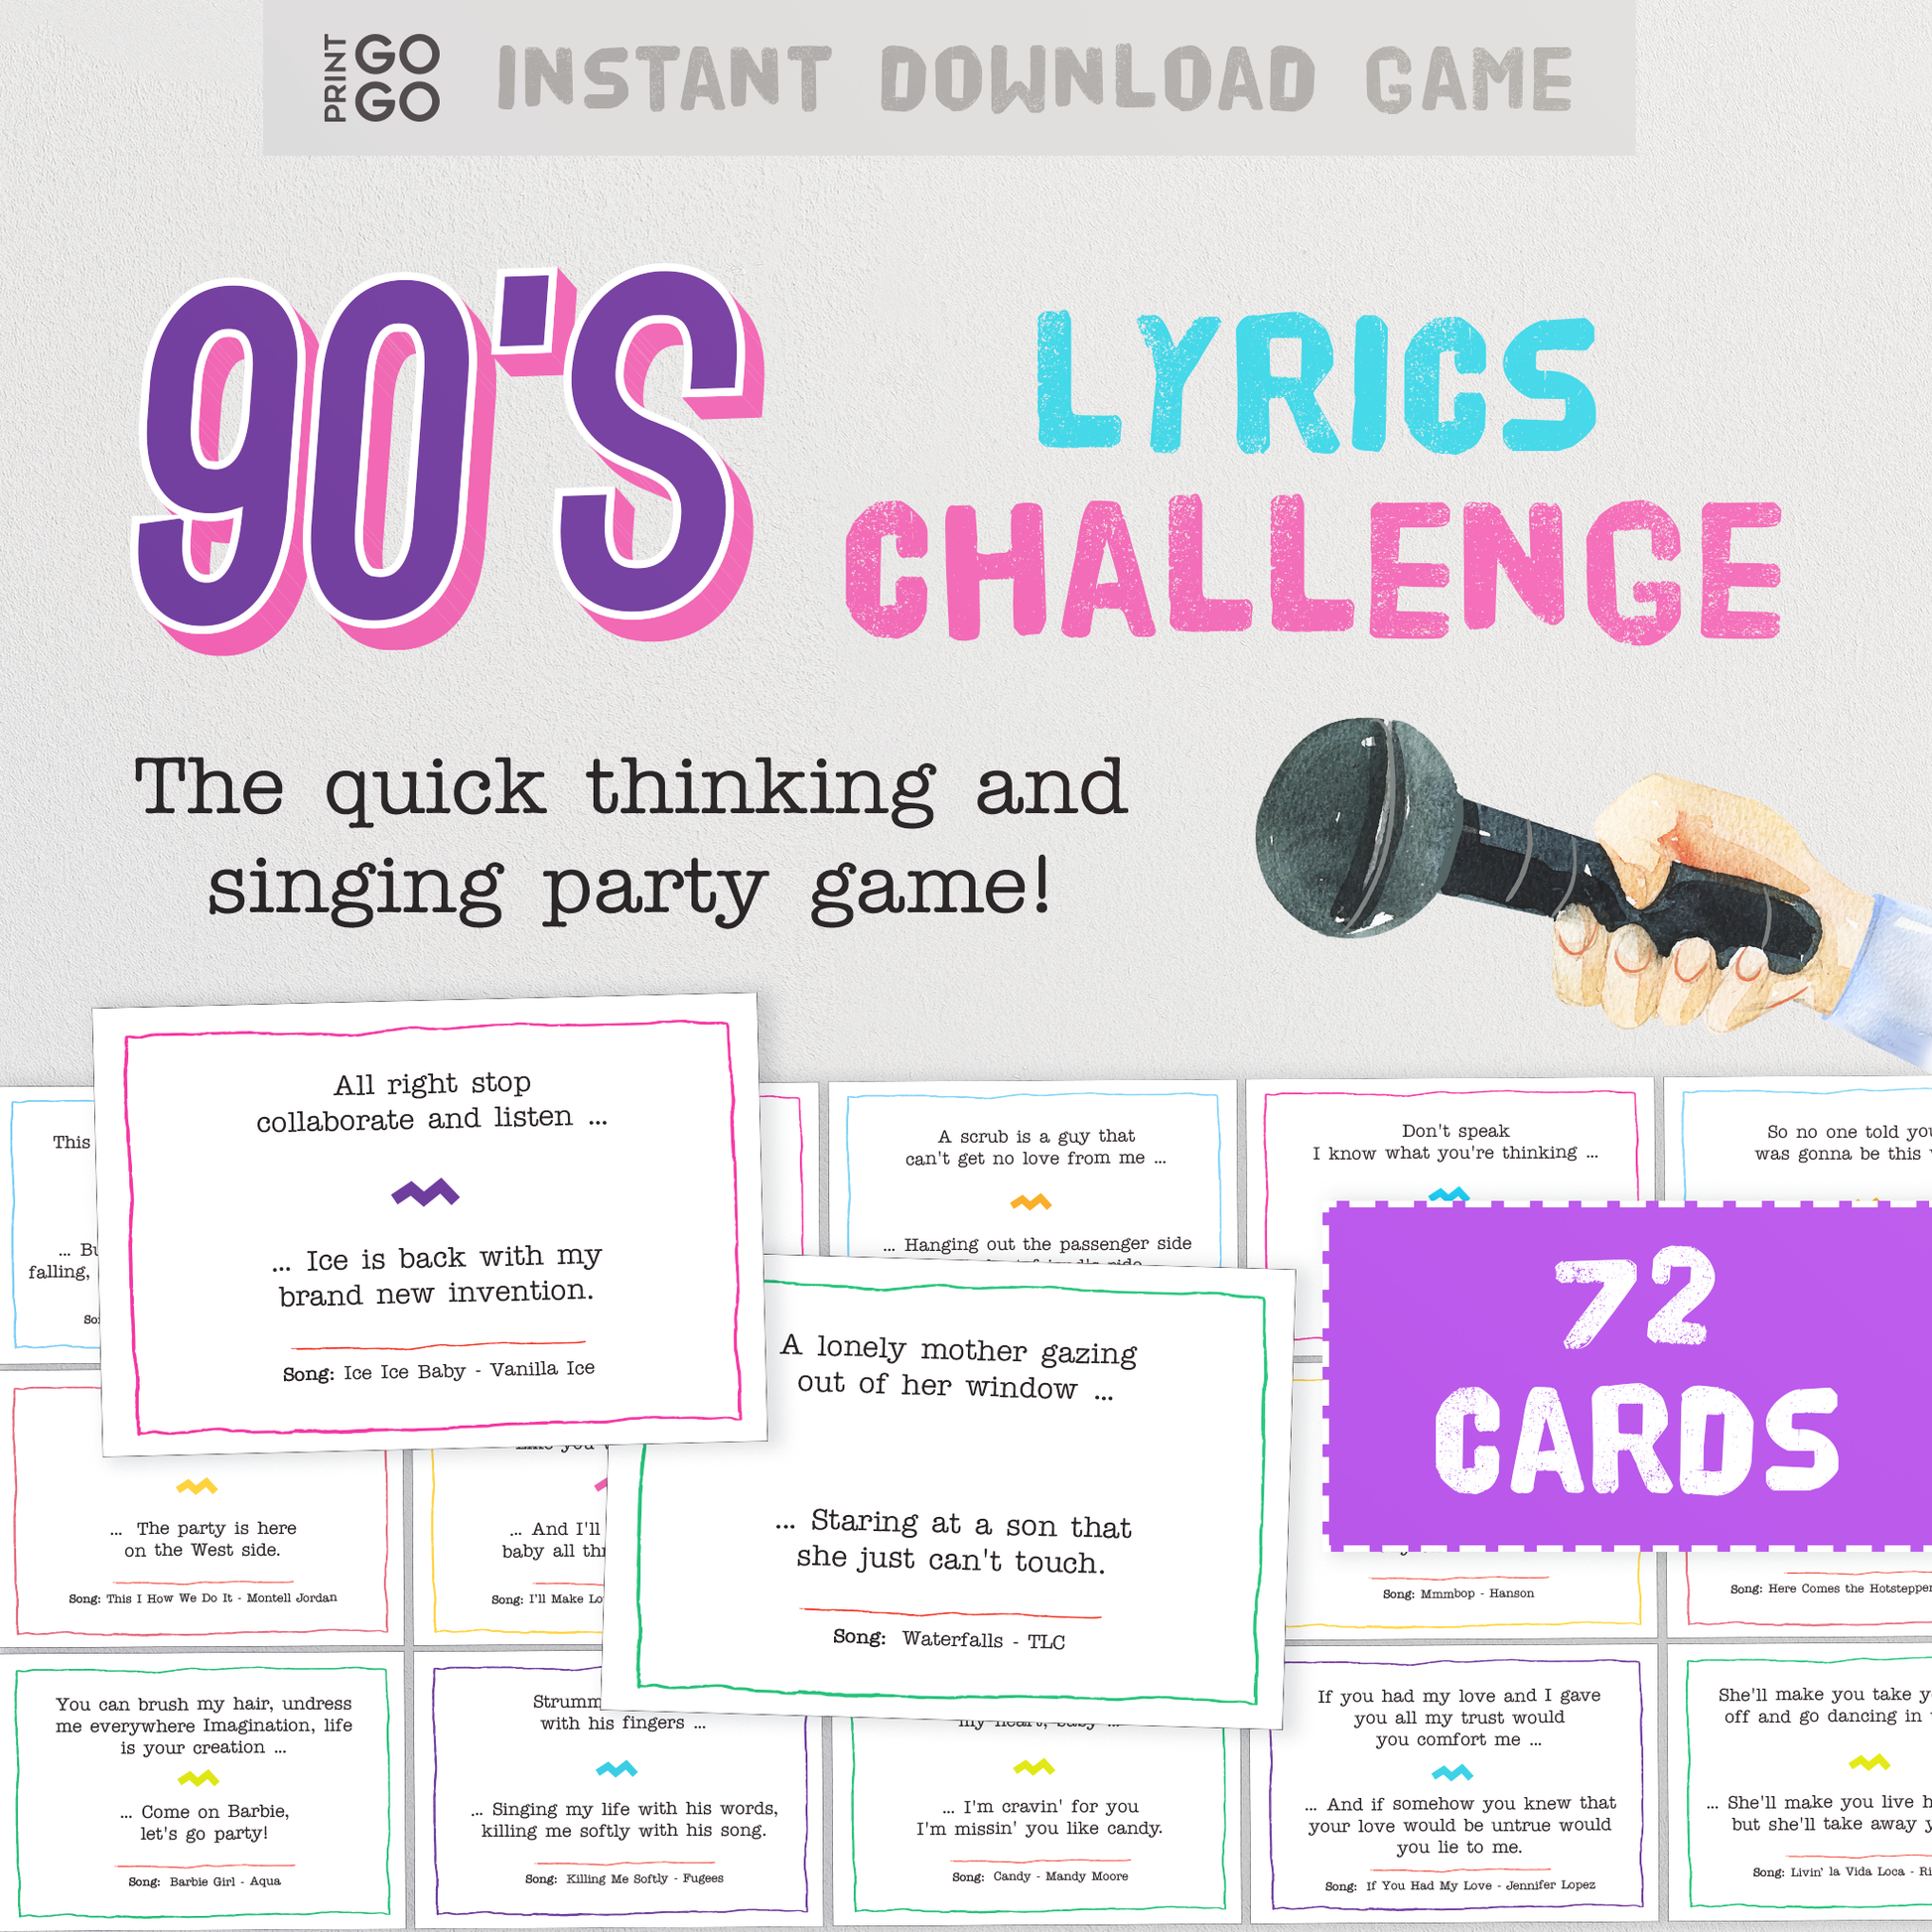 90s Songs Lyrics Challenge Game - The Quick Thinking and Singing Family Party Game